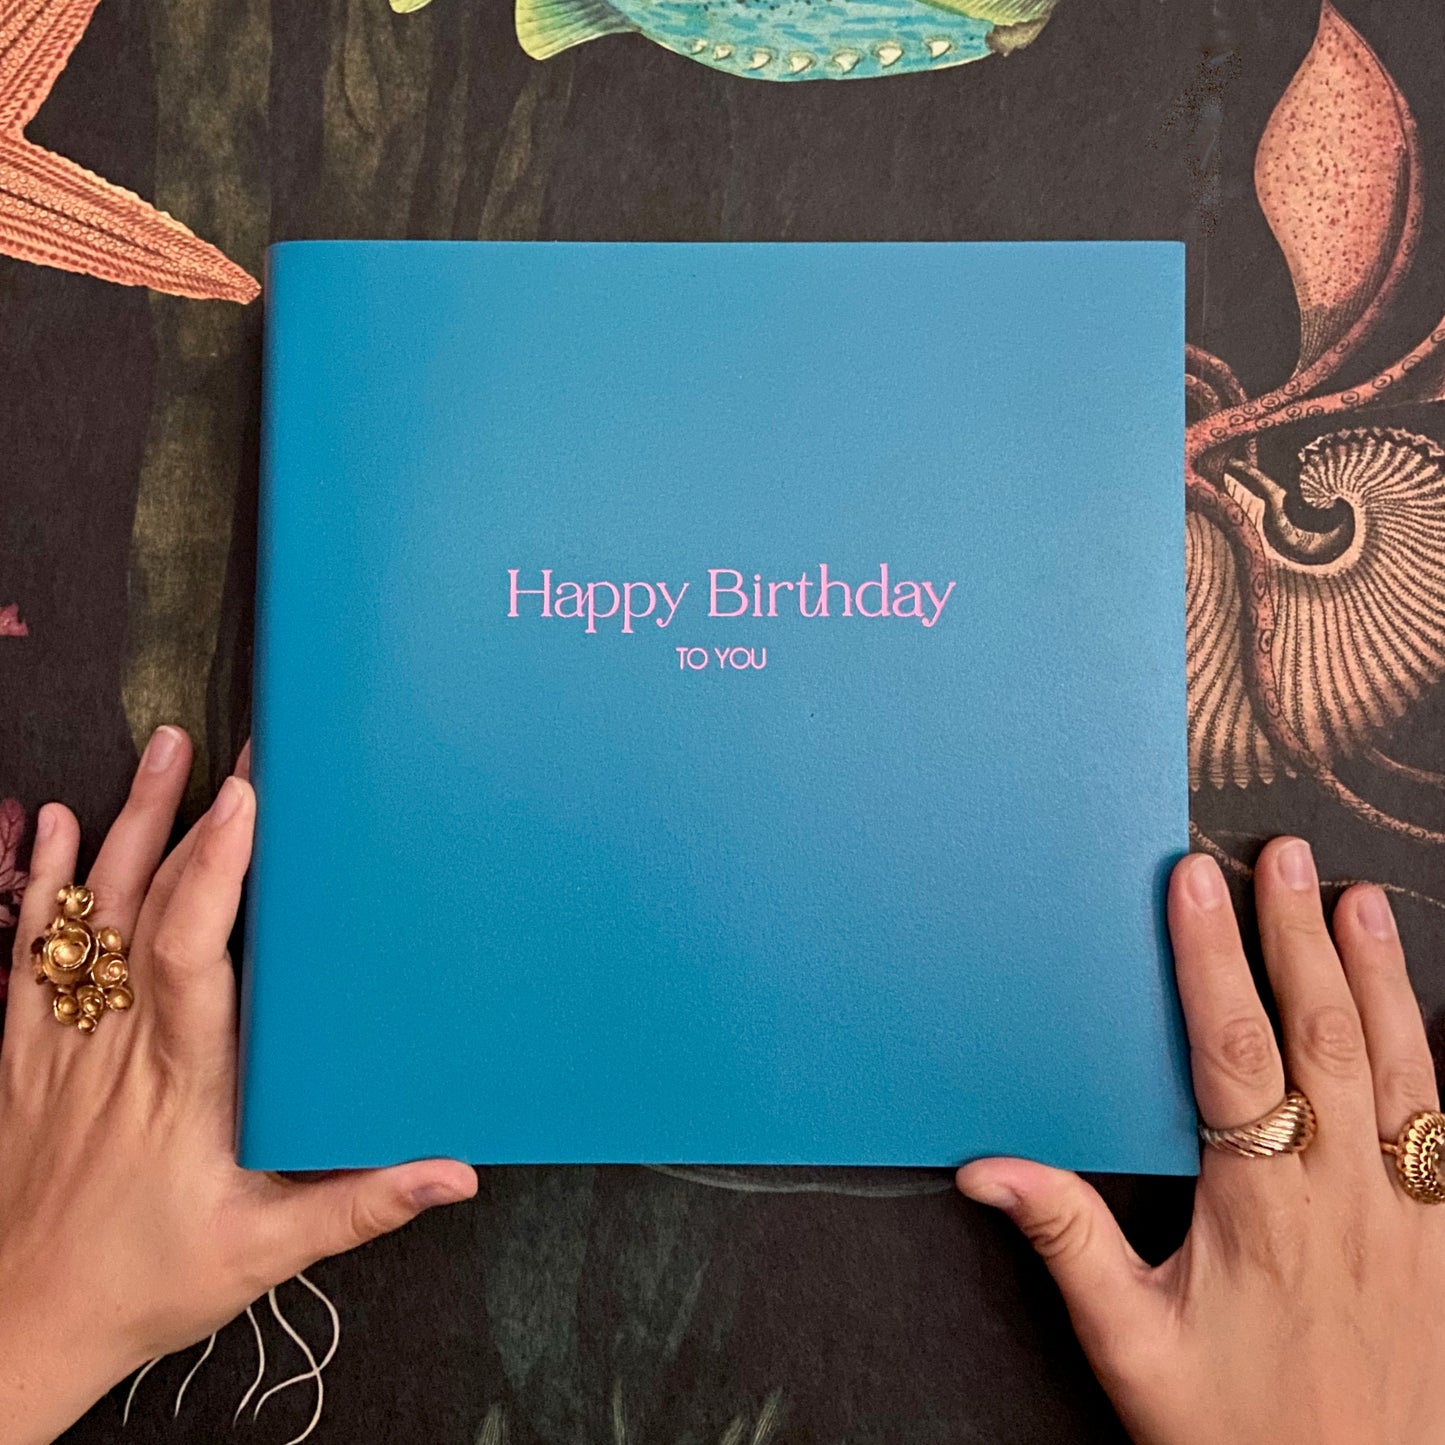 against a black patterned back drop there is a blue photo album which has been printed with the words Happy Birthday to you. The birthday phtoo album is blue and the writing on the front of the album is pink